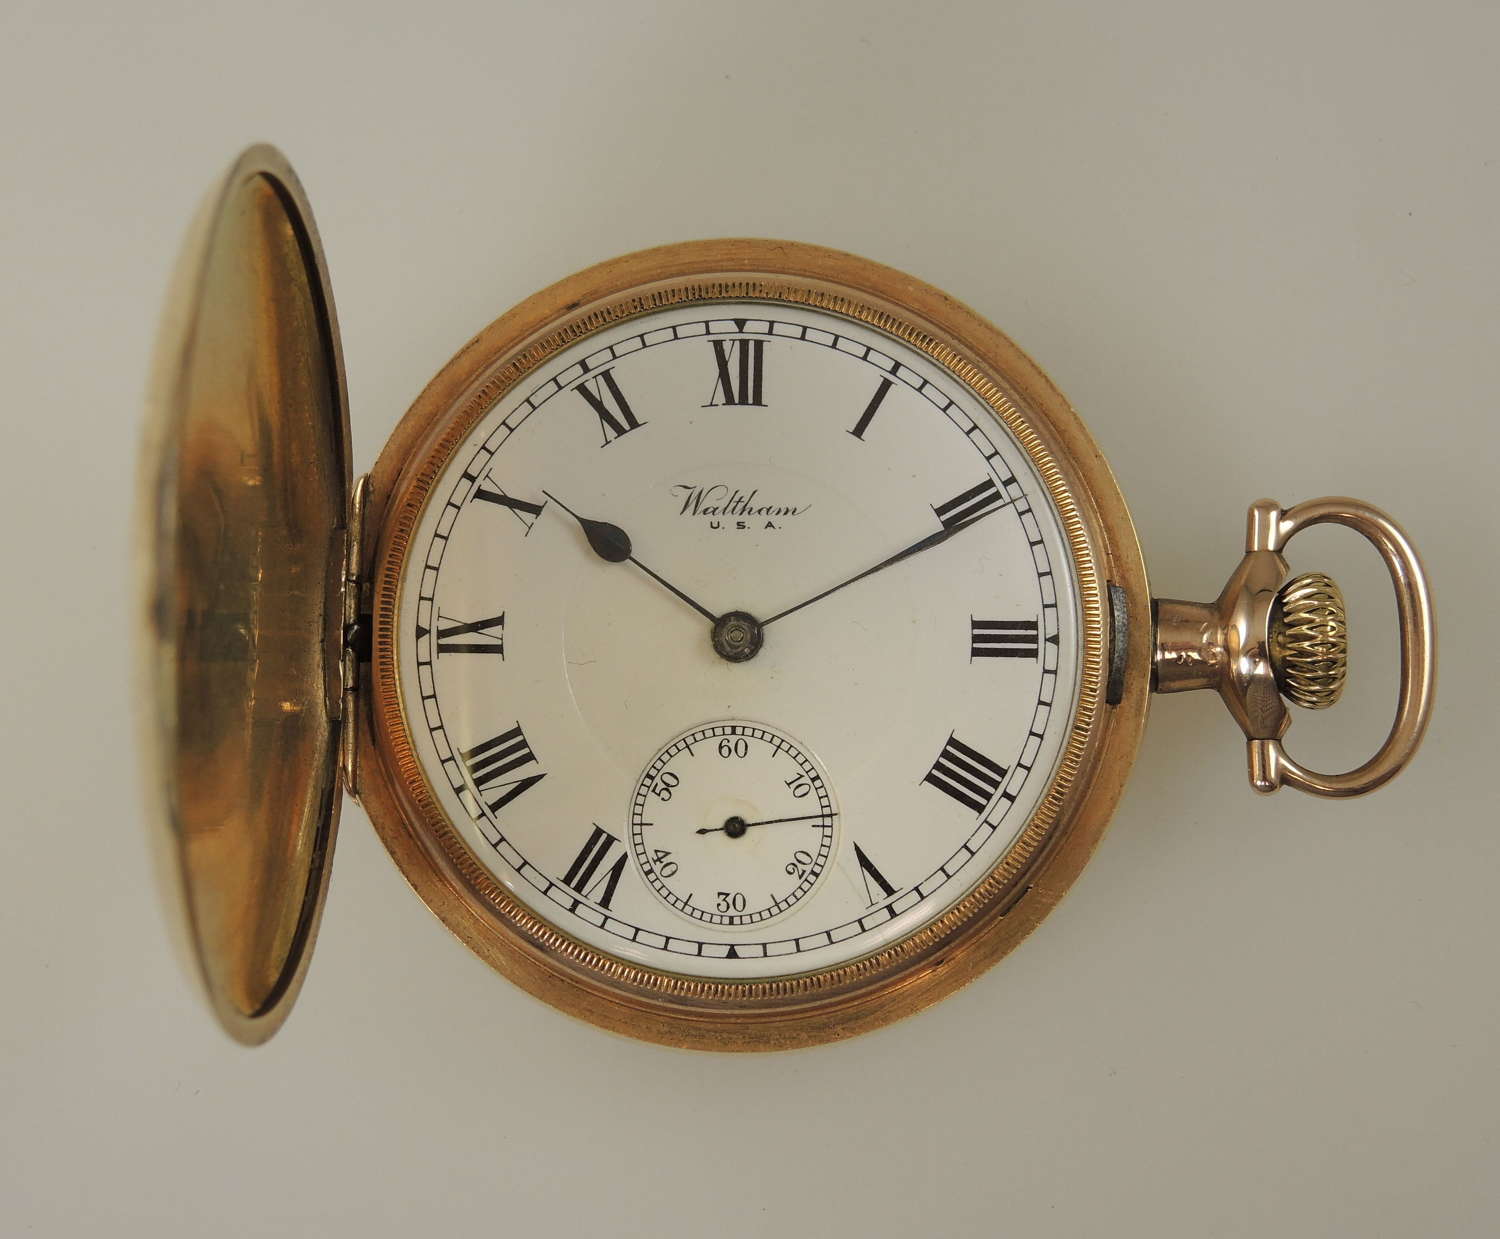 Vintage gold plated hunter pocket watch by Waltham c1907